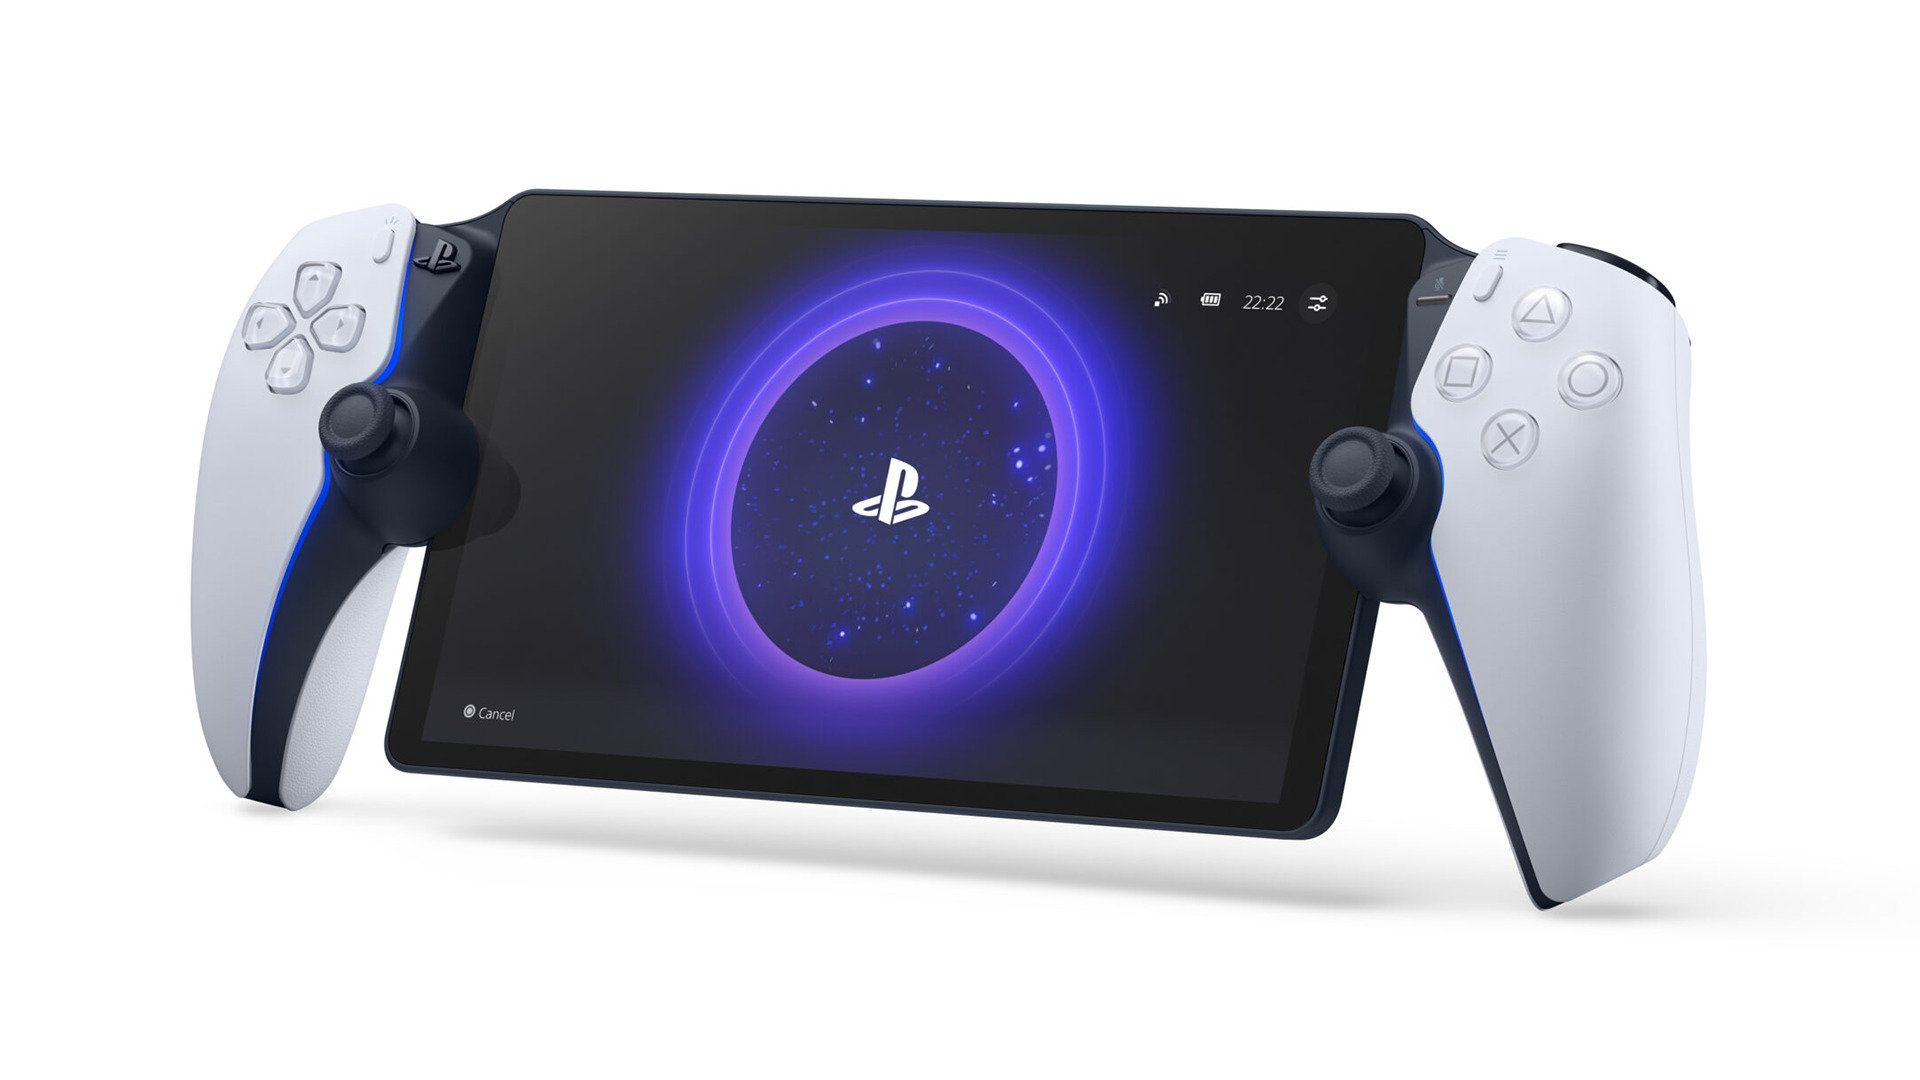 PS5 Slim Rumors: What We Know So Far - CNET